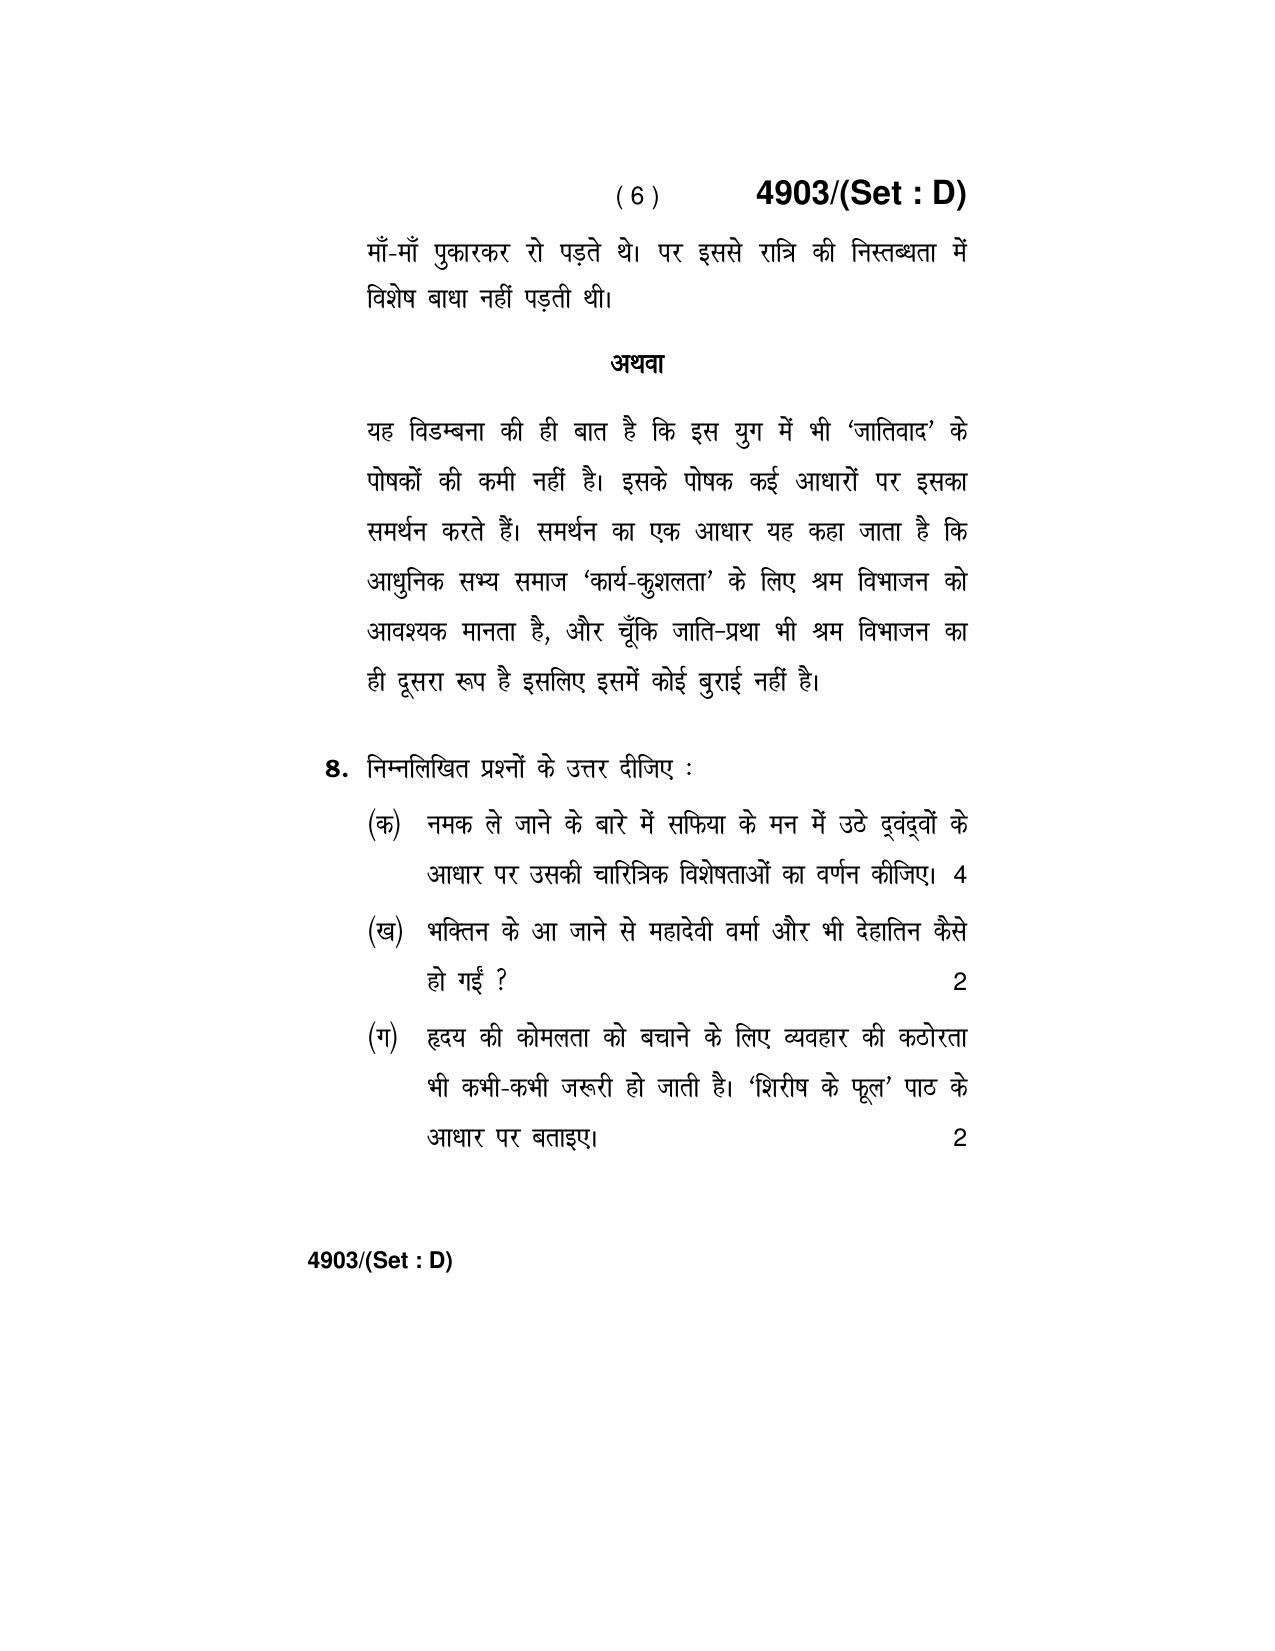 Haryana Board HBSE Class 12 Hindi Core 2020 Question Paper - Page 30